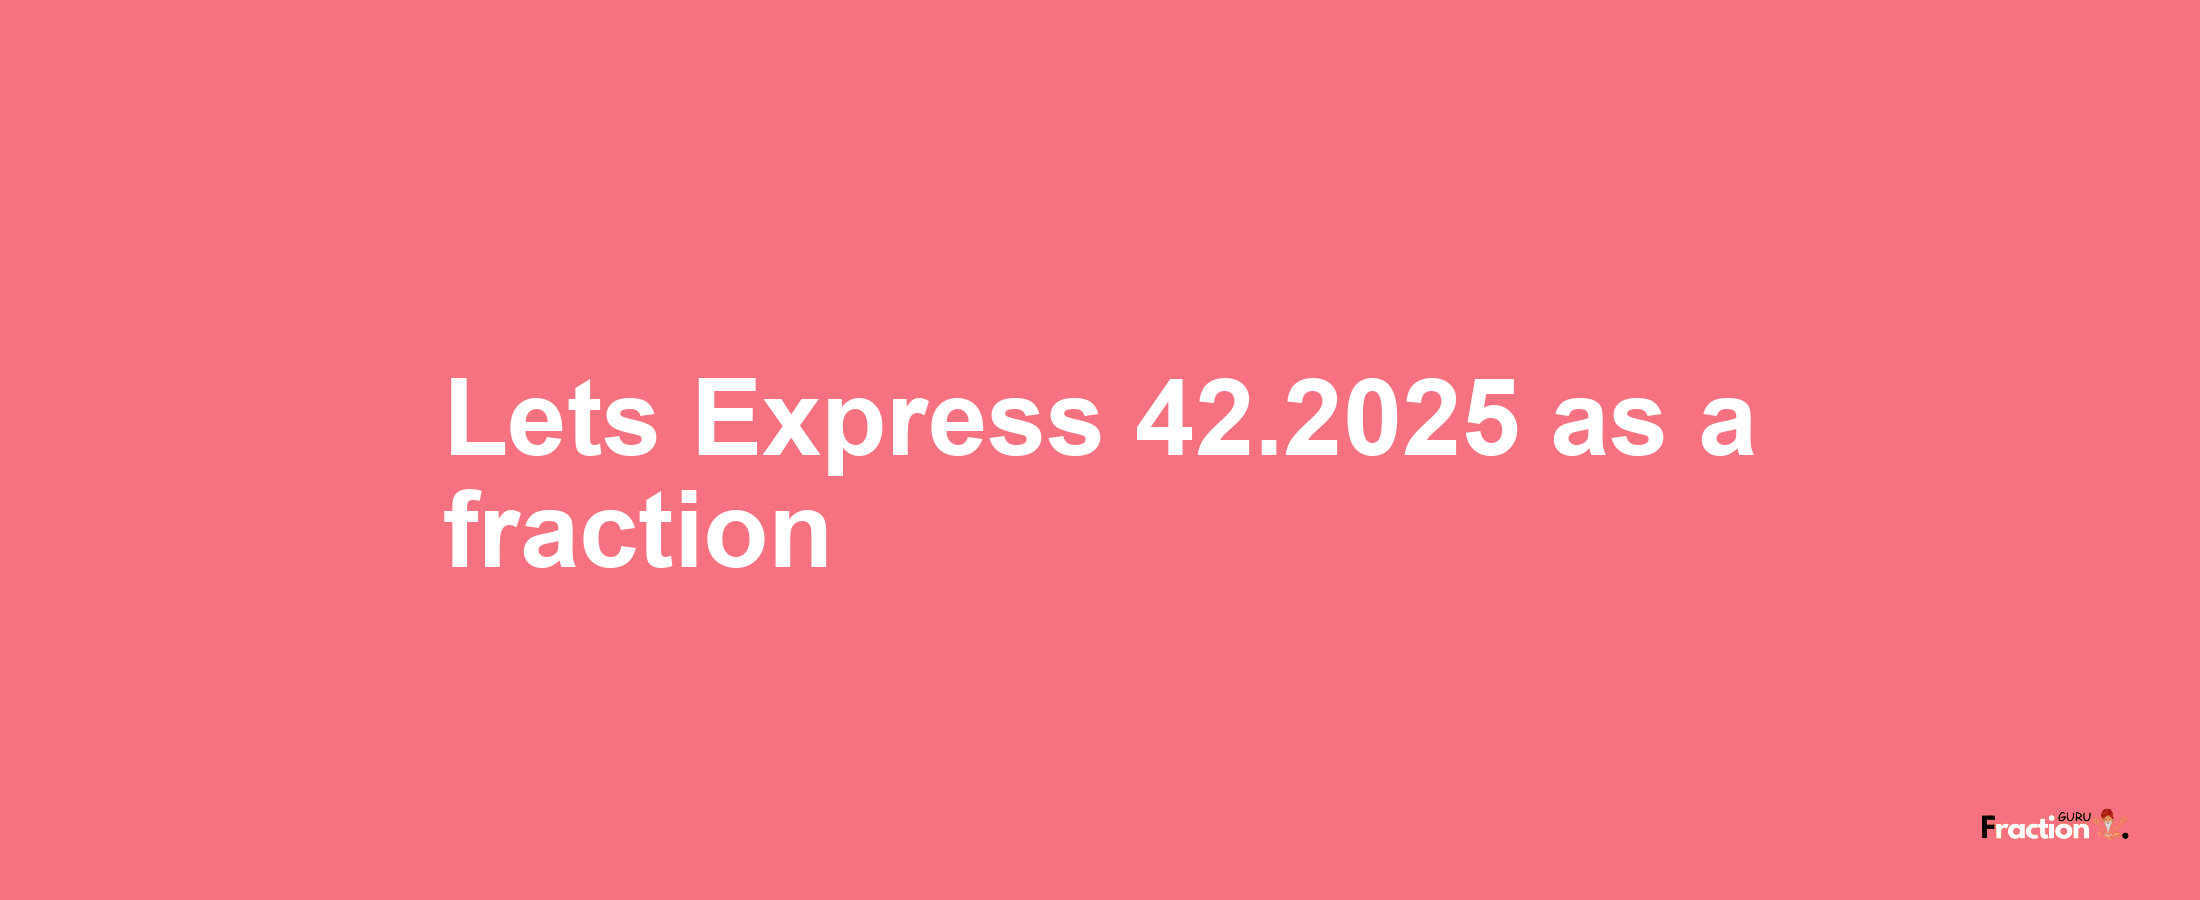 Lets Express 42.2025 as afraction